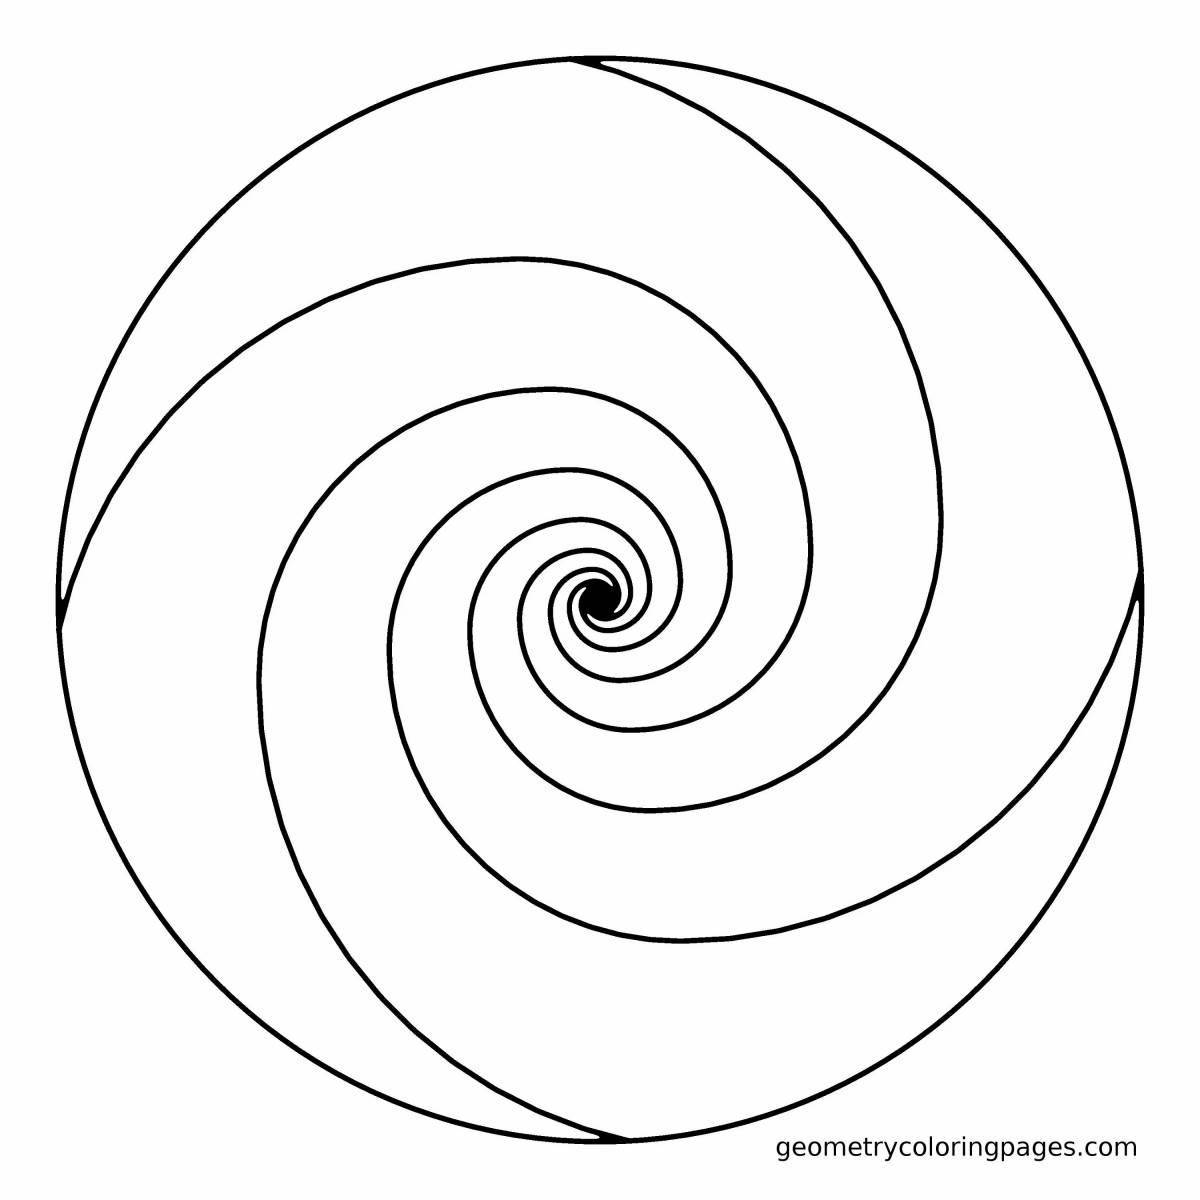 The joyful creation of your own spiral